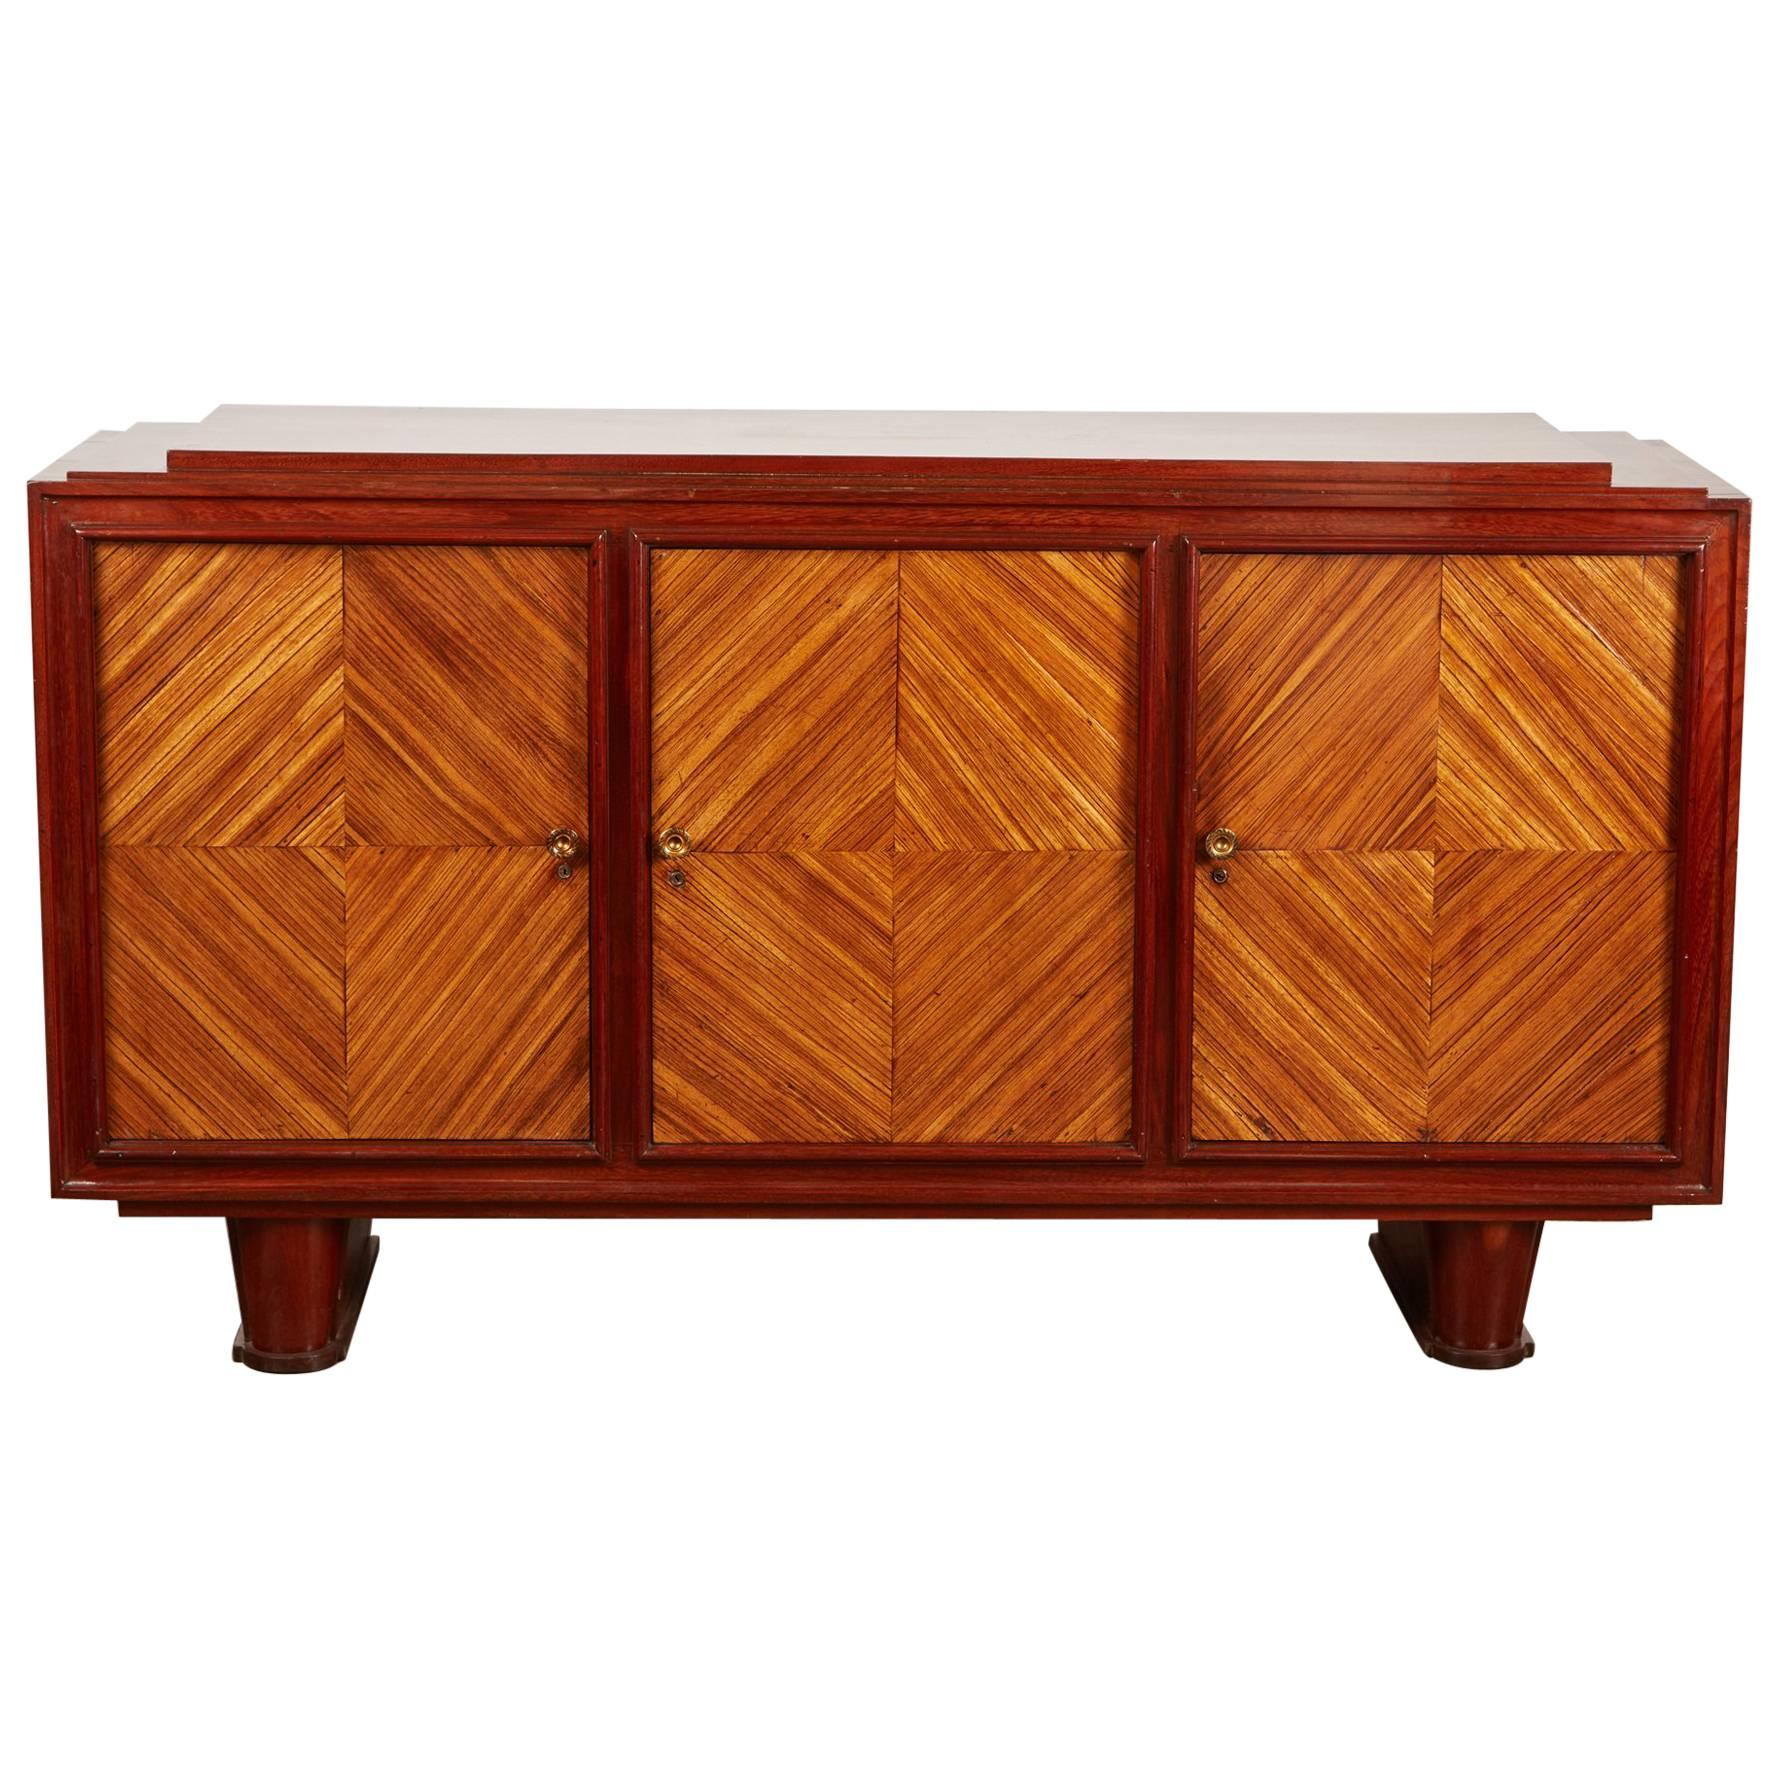 20th Century French Colonial Deco Sideboard